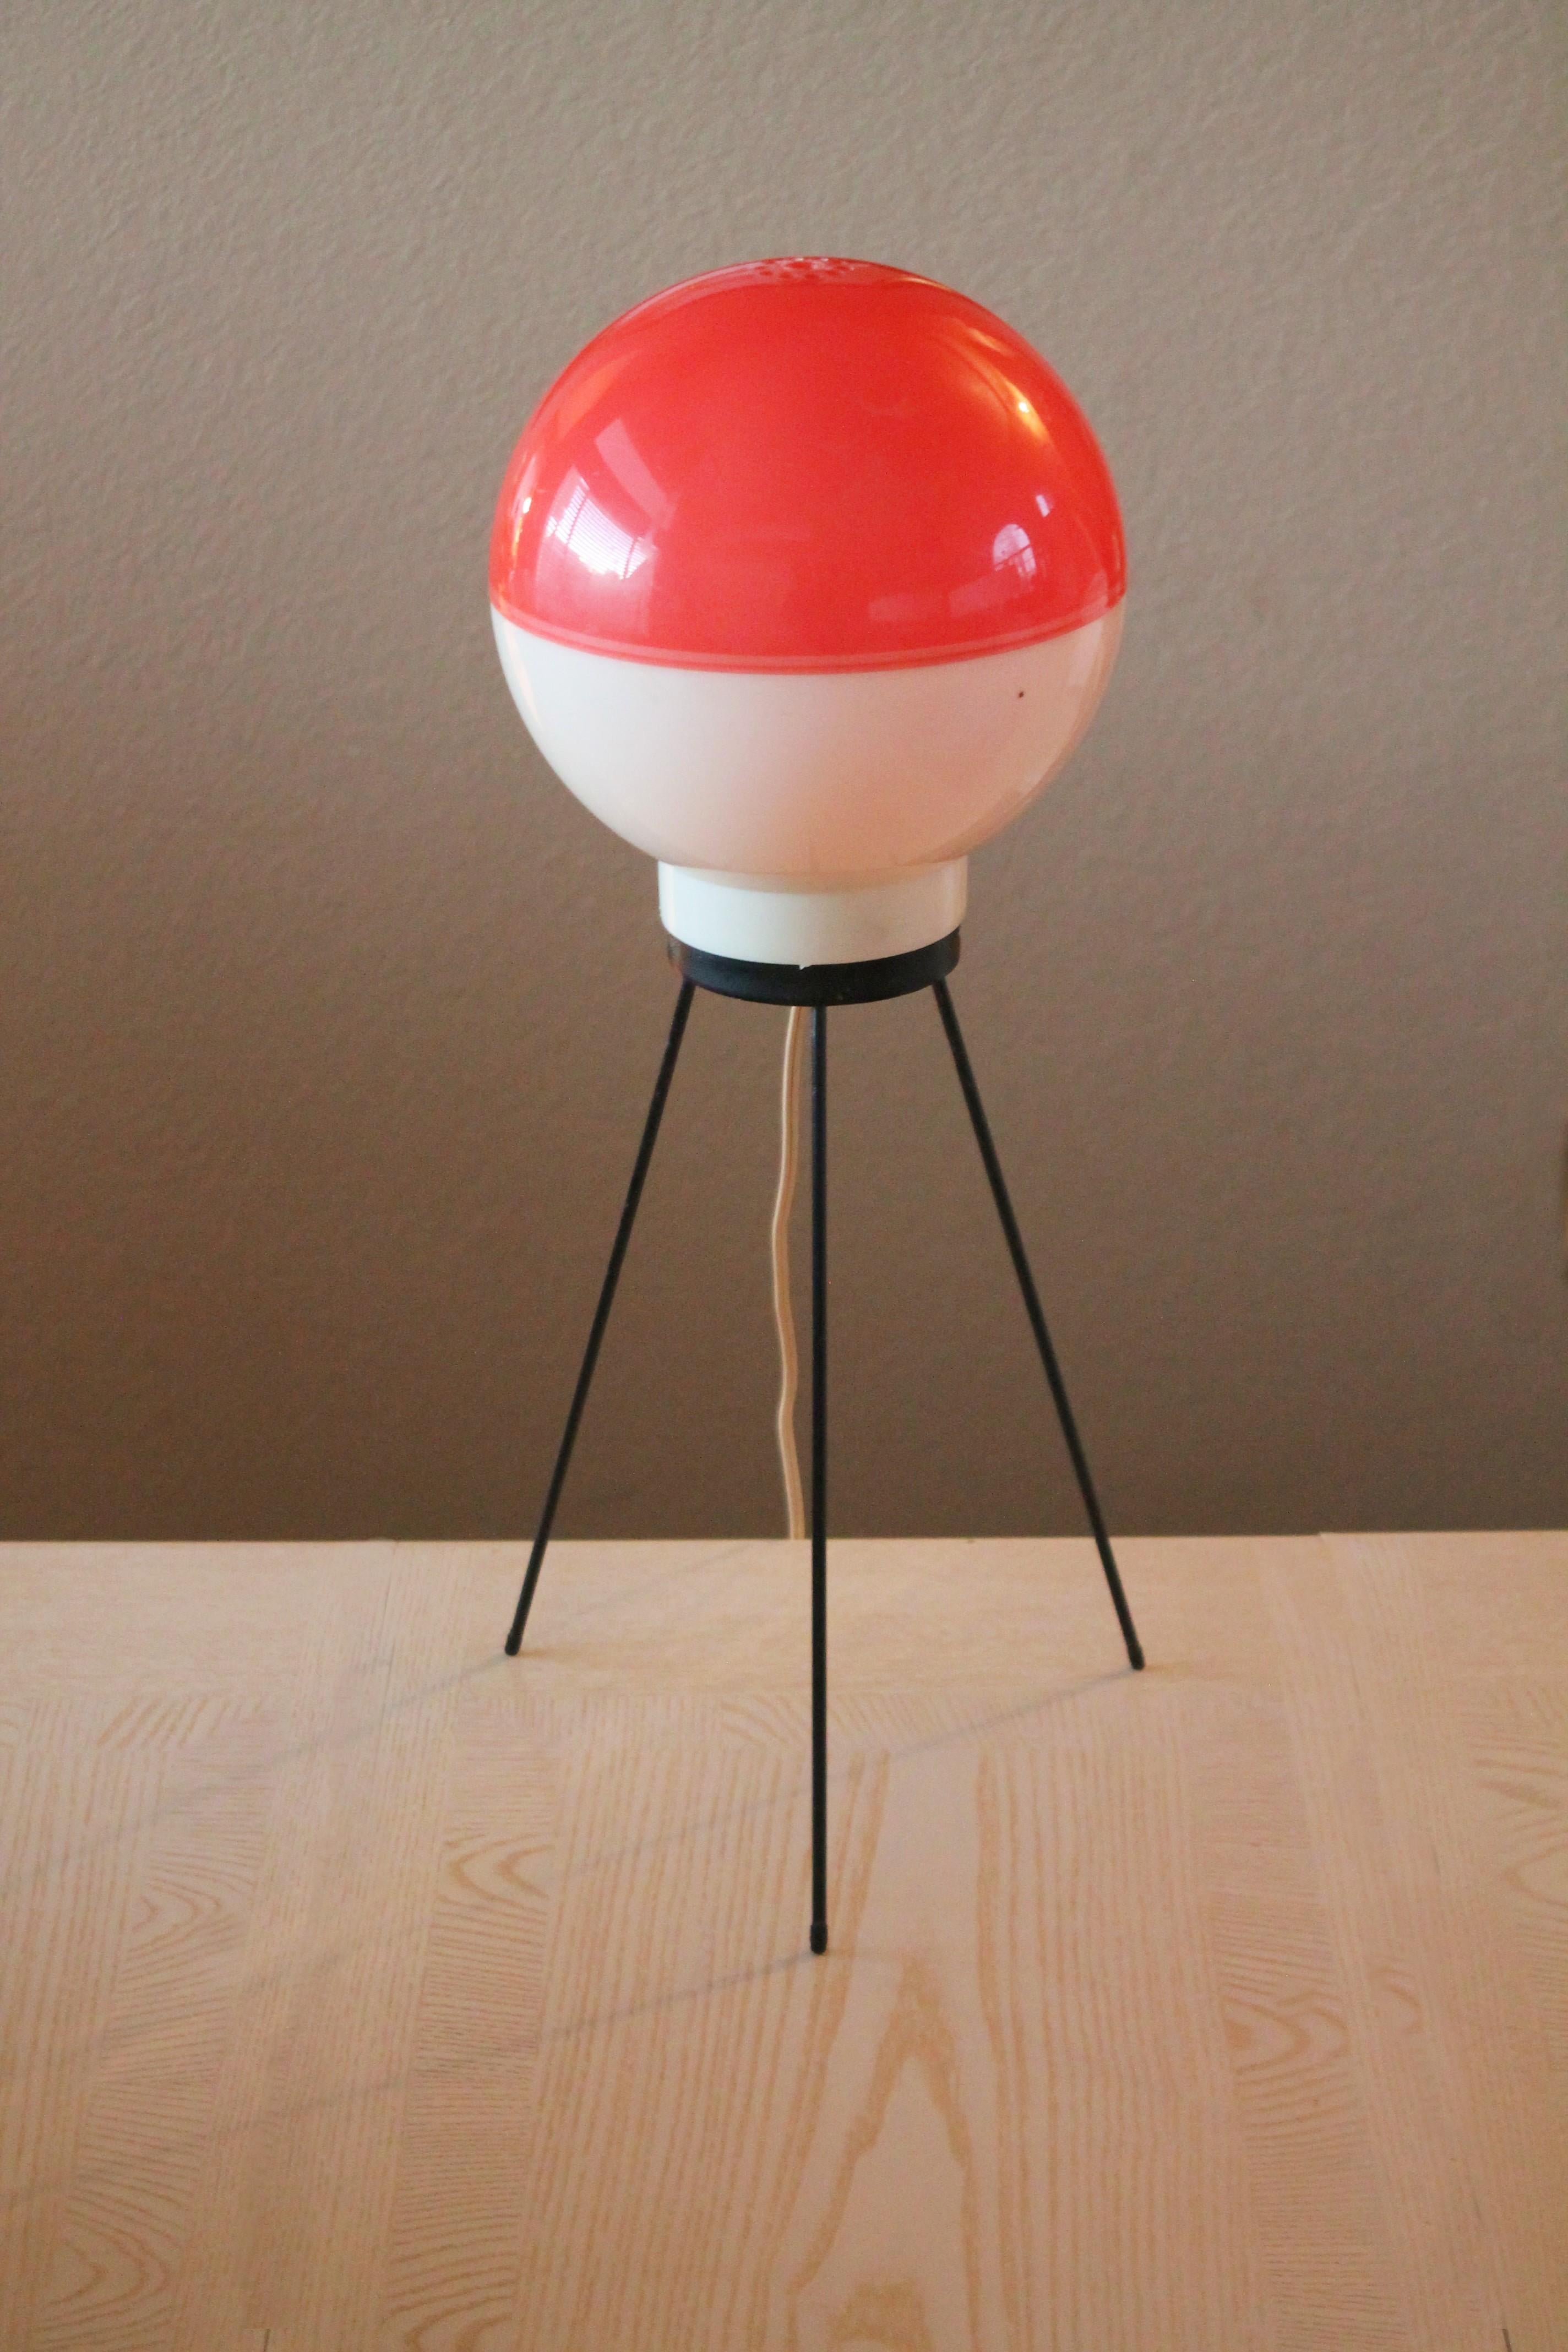 FABULOUS!

PERSPEX & METAL
TWO TONE
TRIPOD TABLE LAMP
AFTER GIO PONTI for ARREDOLUCE

Dimensions: Approximately 22